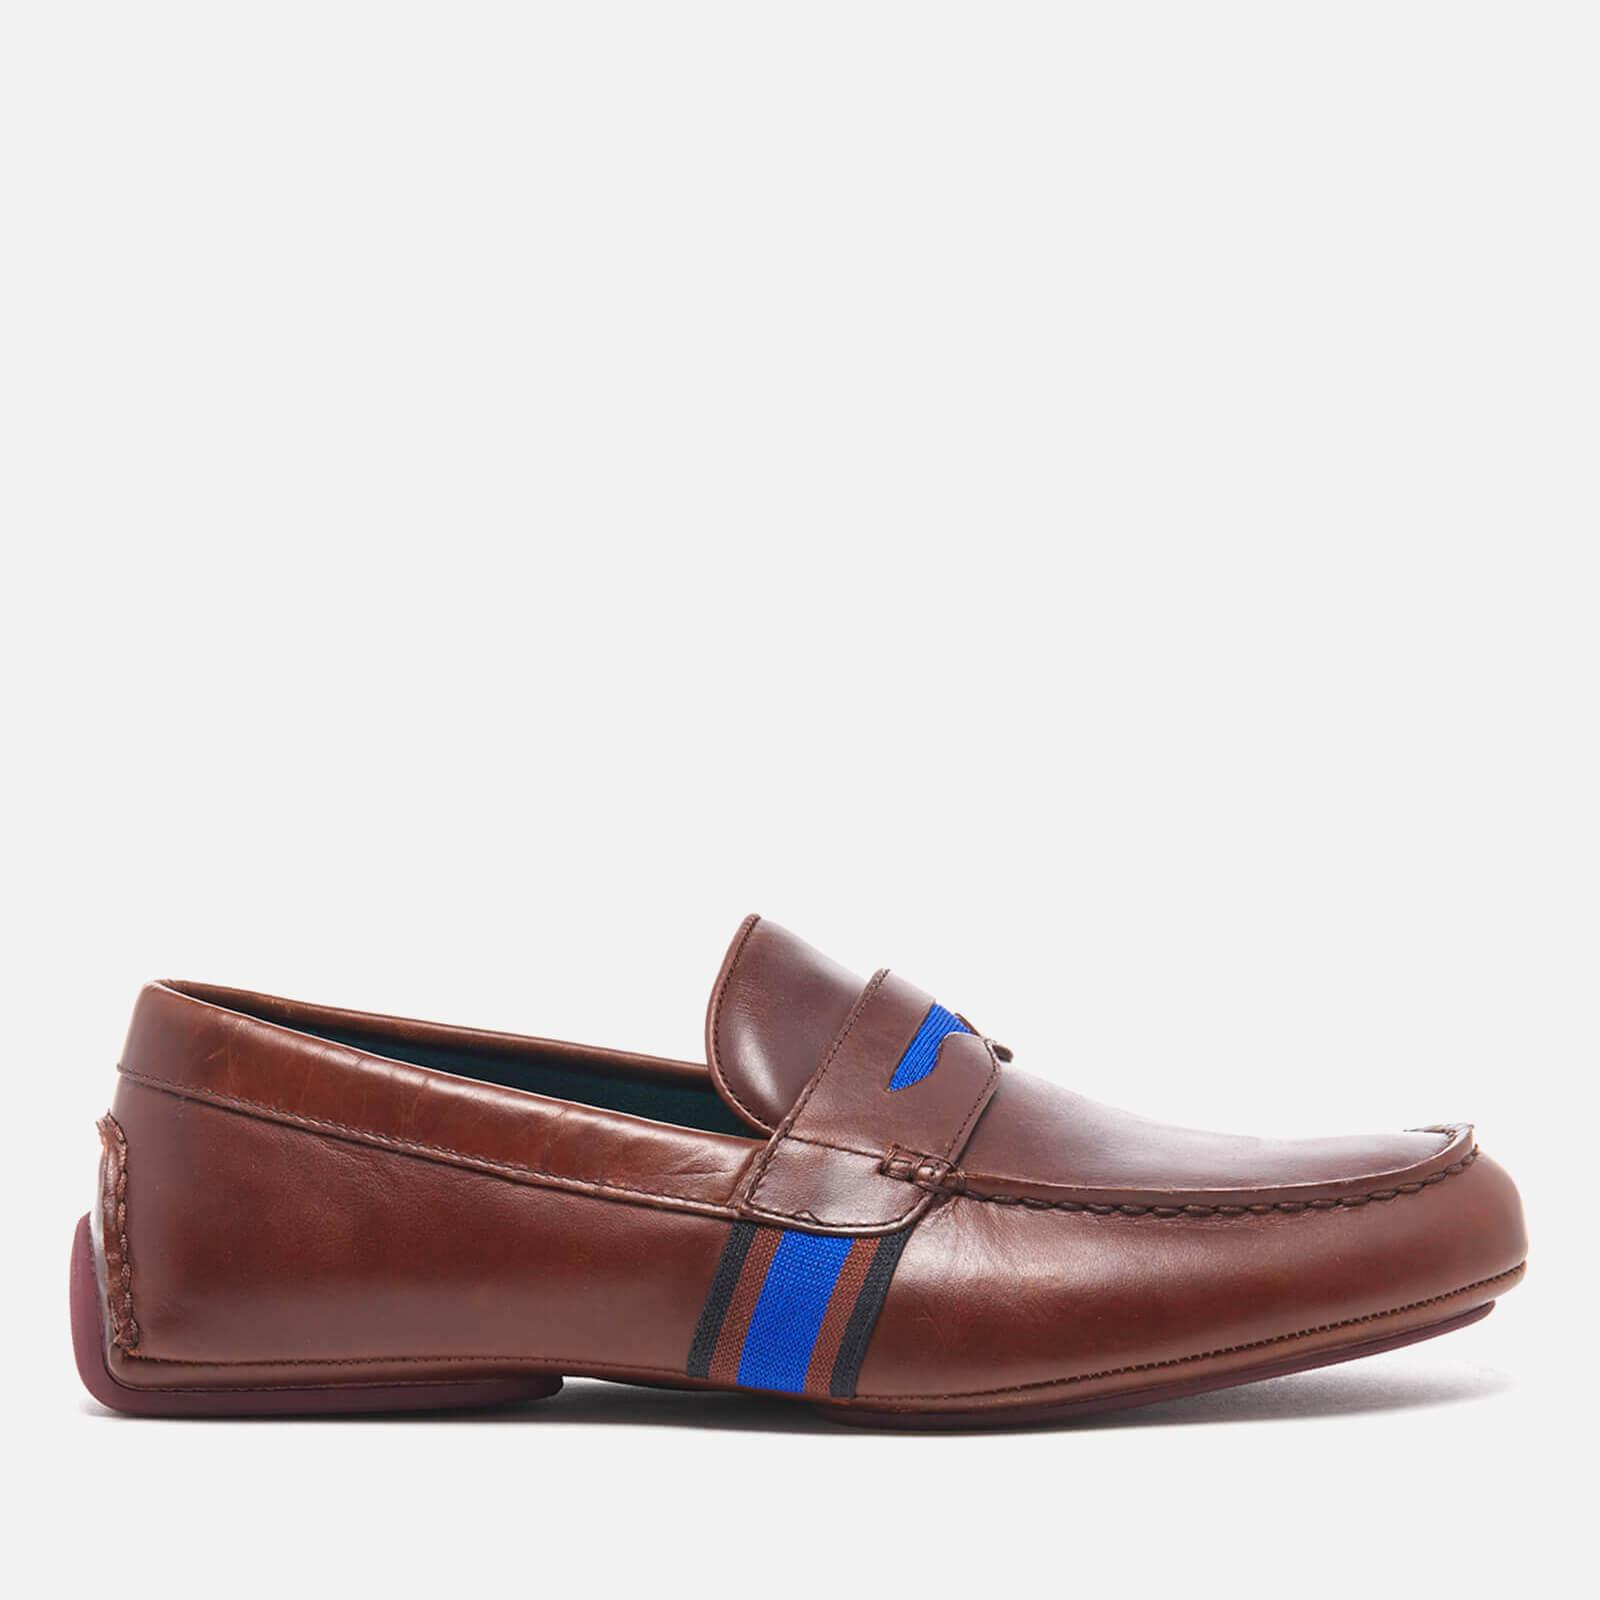 paul smith driving shoes